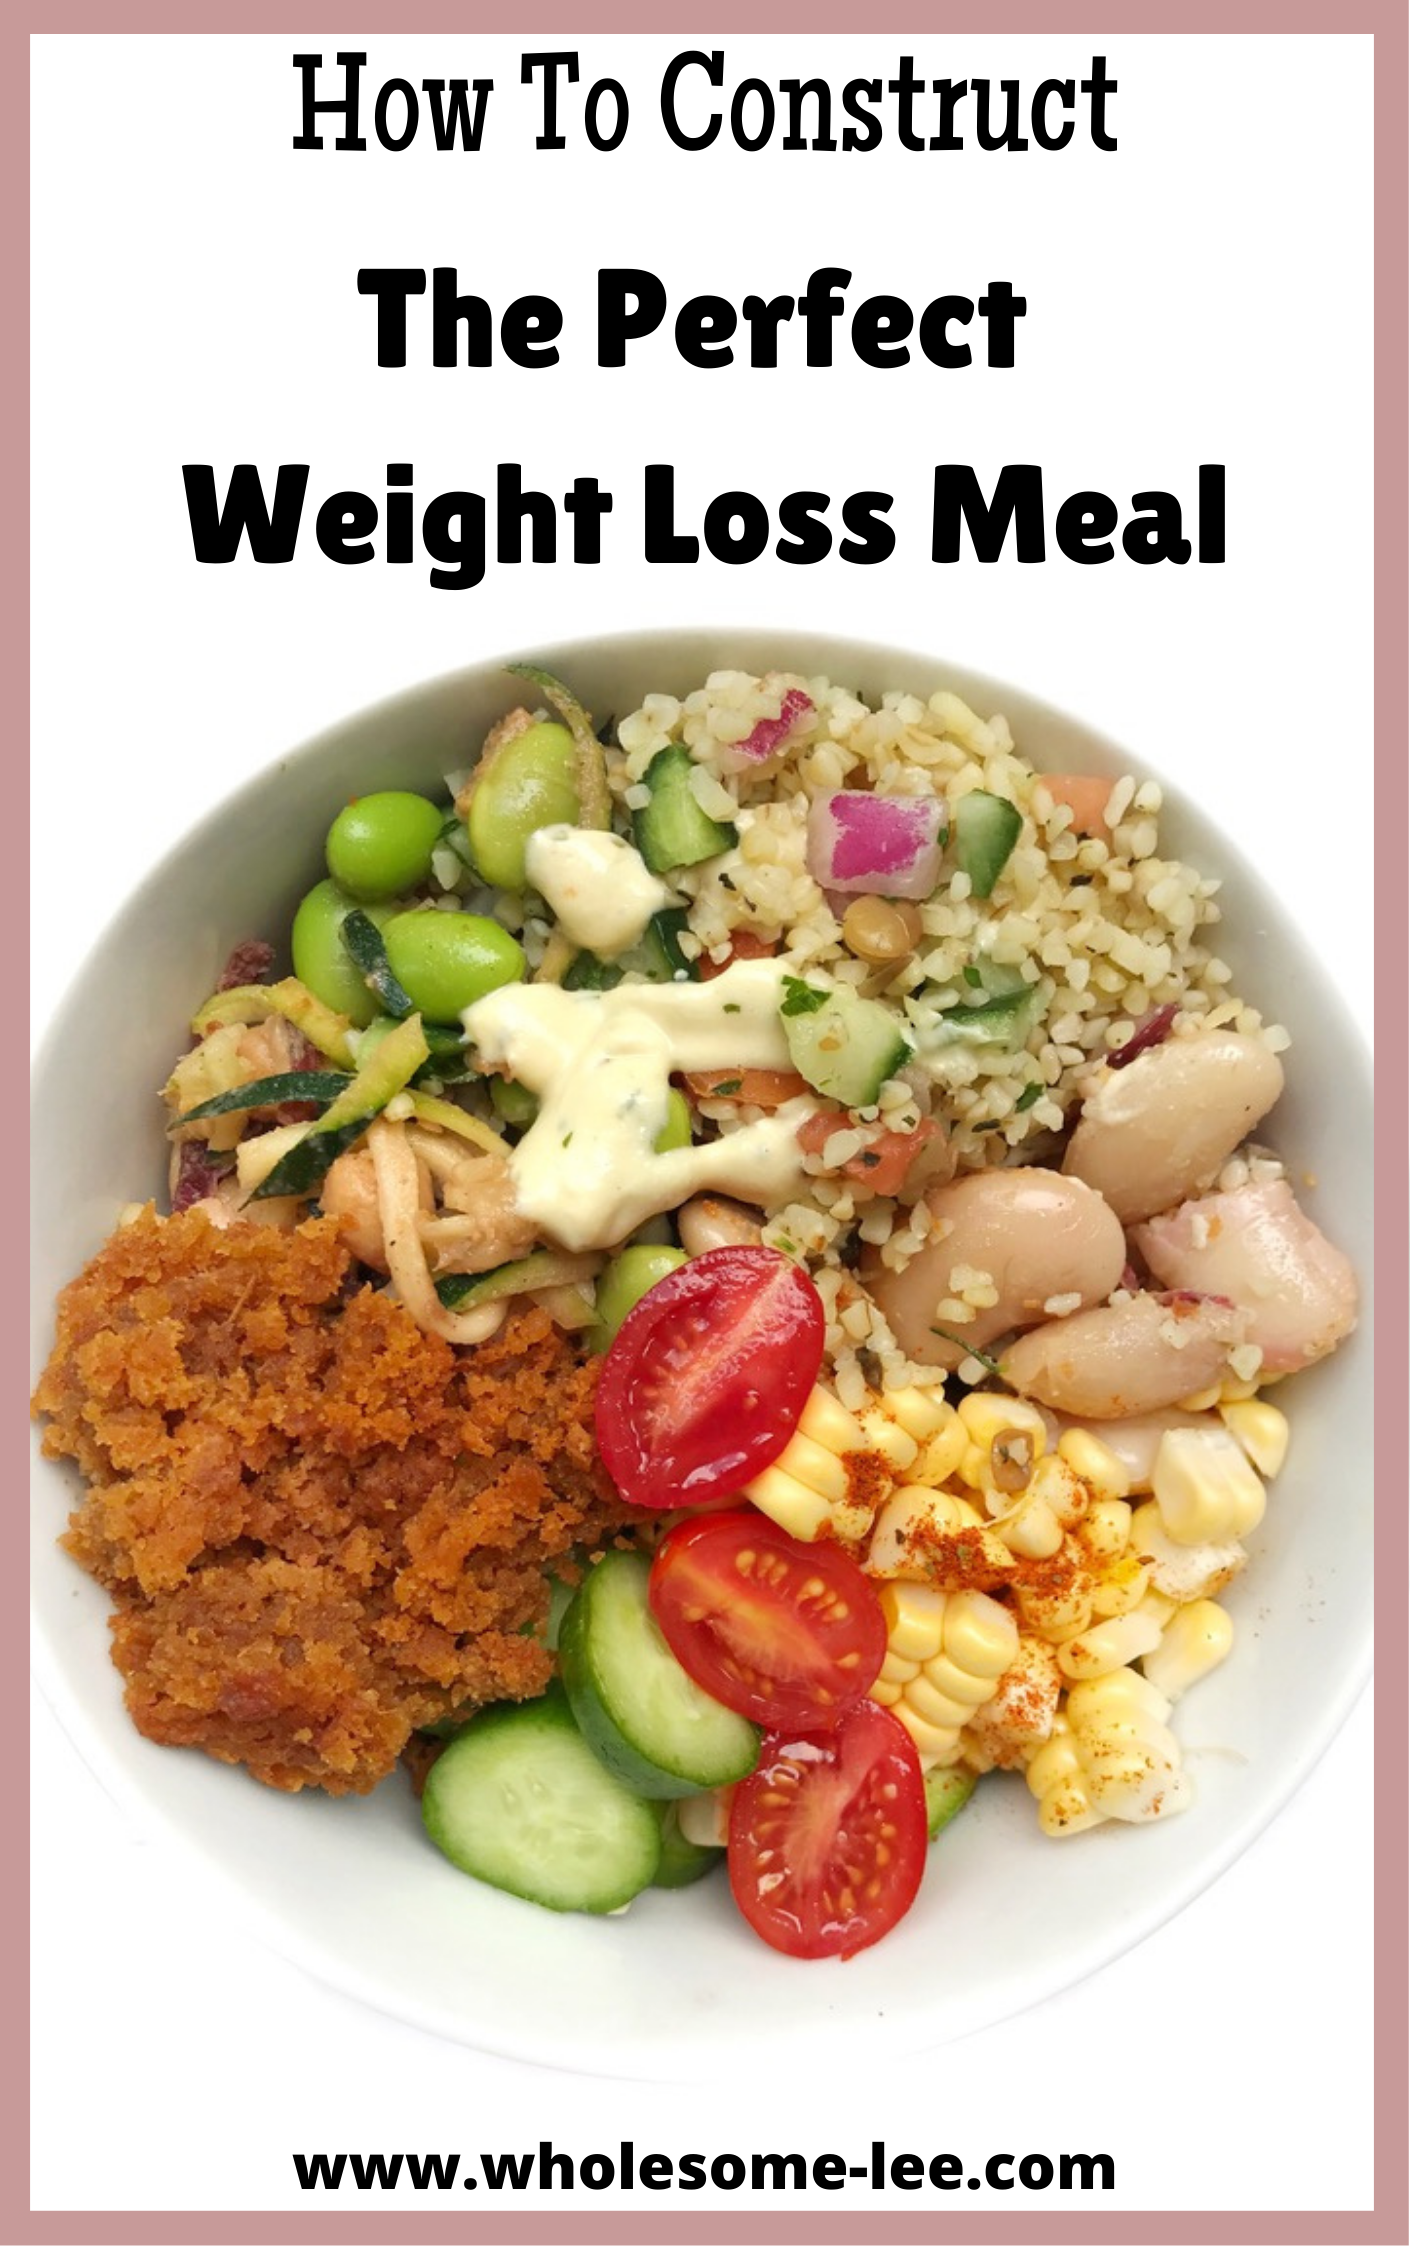 The Perfect Weight Loss Meal